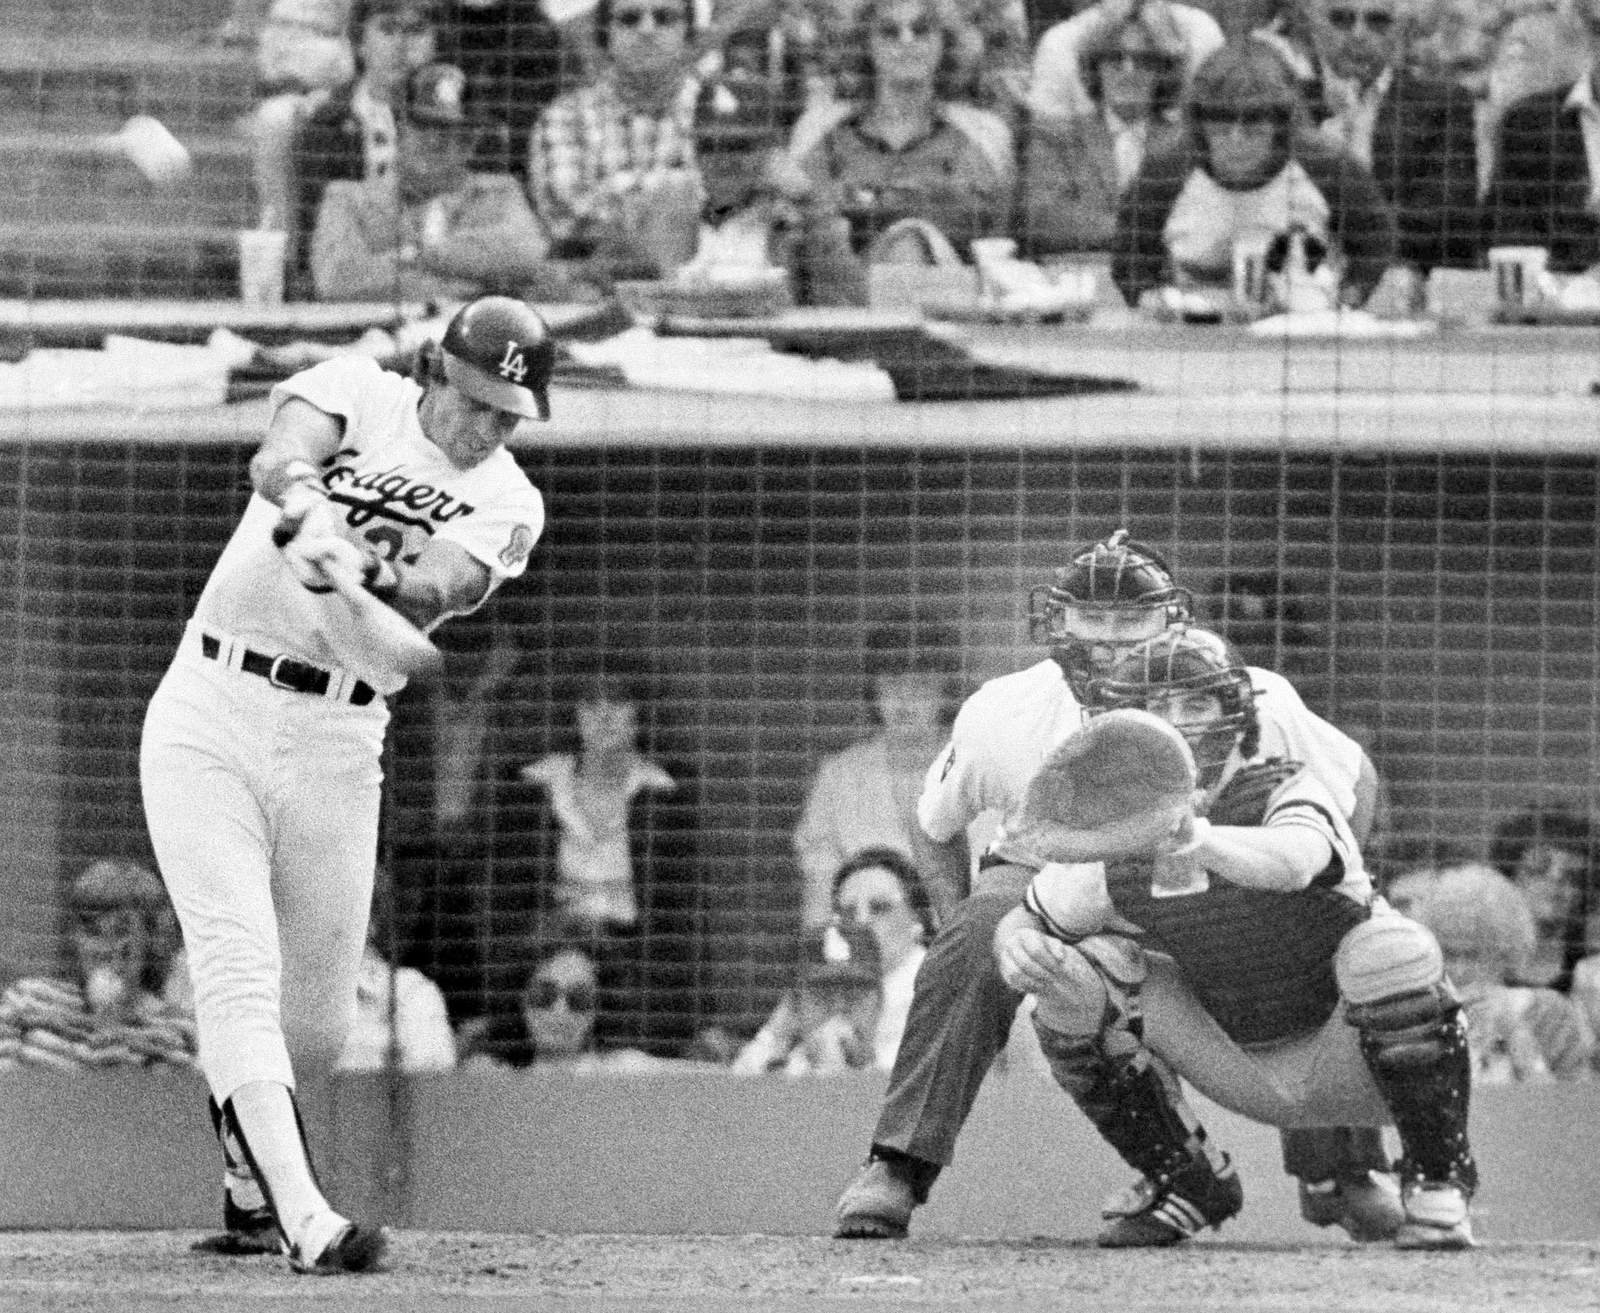 Johnstone, 2-time WS champ and popular prankster, dies at 74